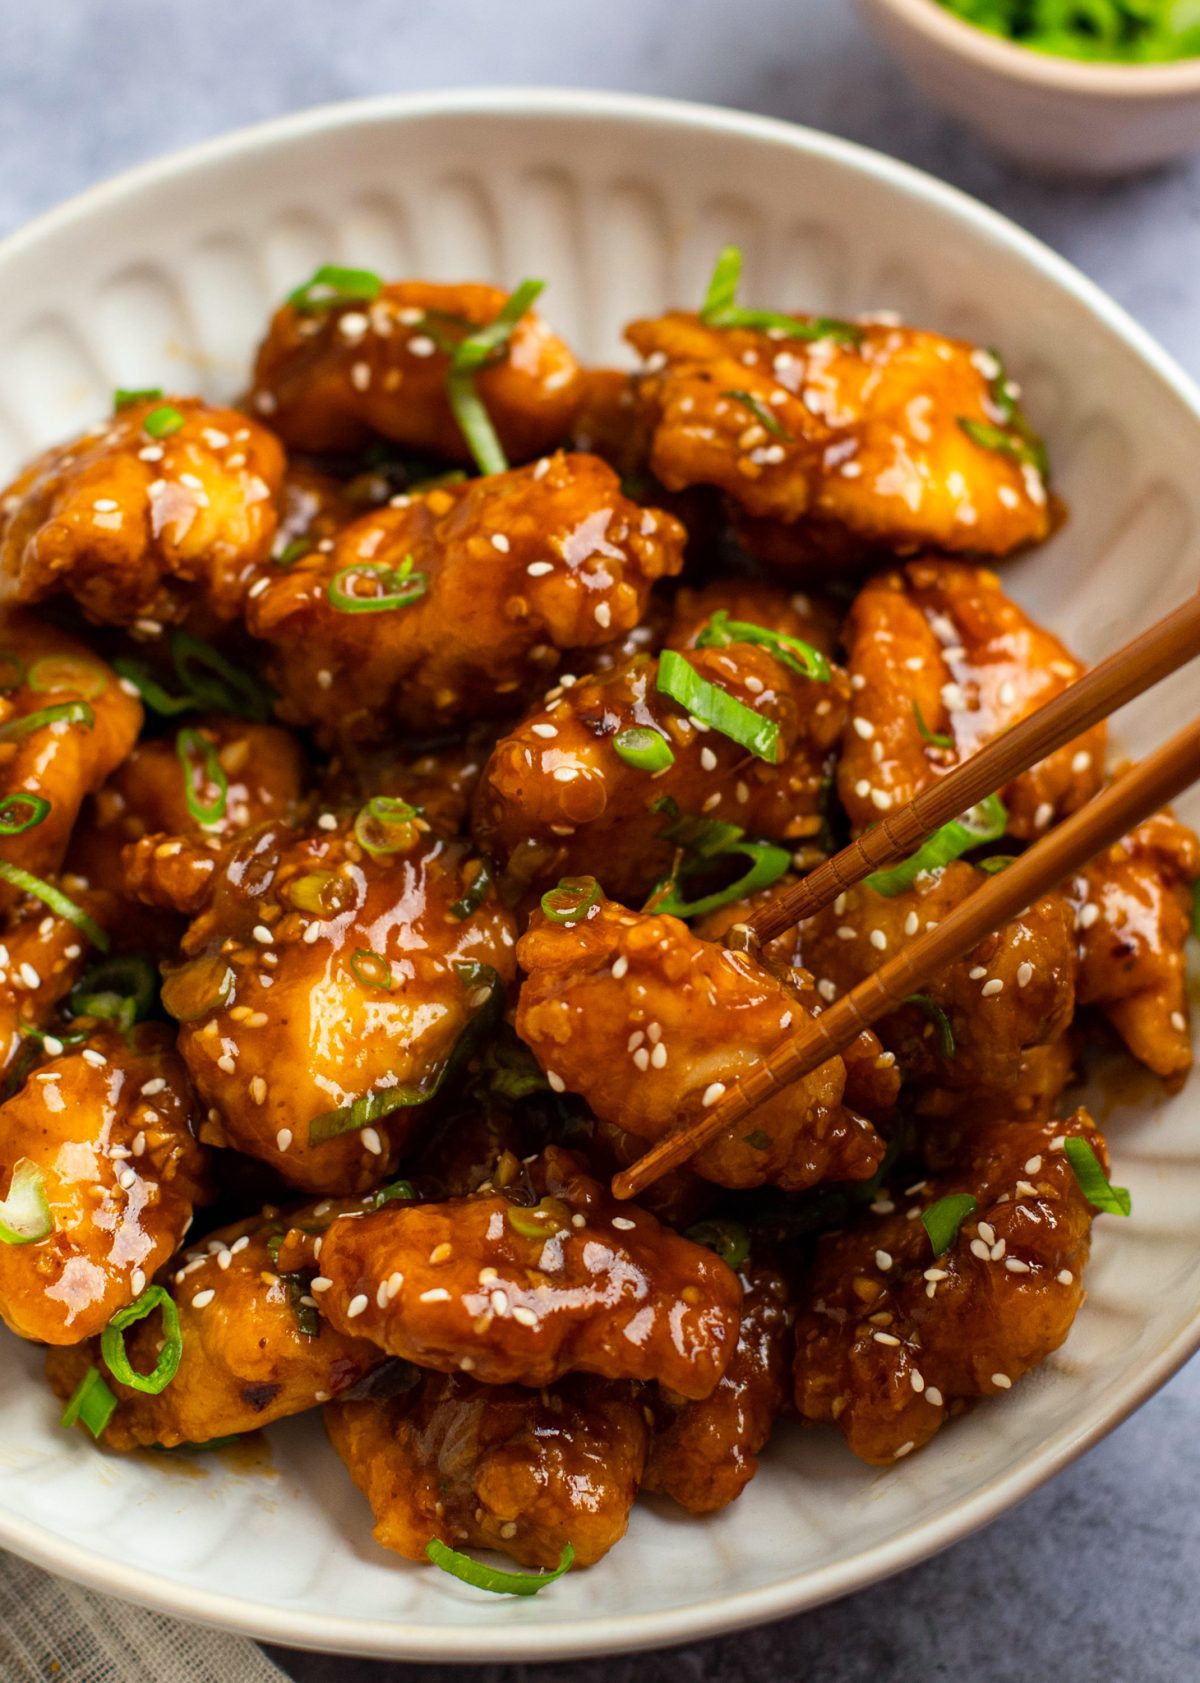 General Tso’s Chicken - Once Upon a Chef